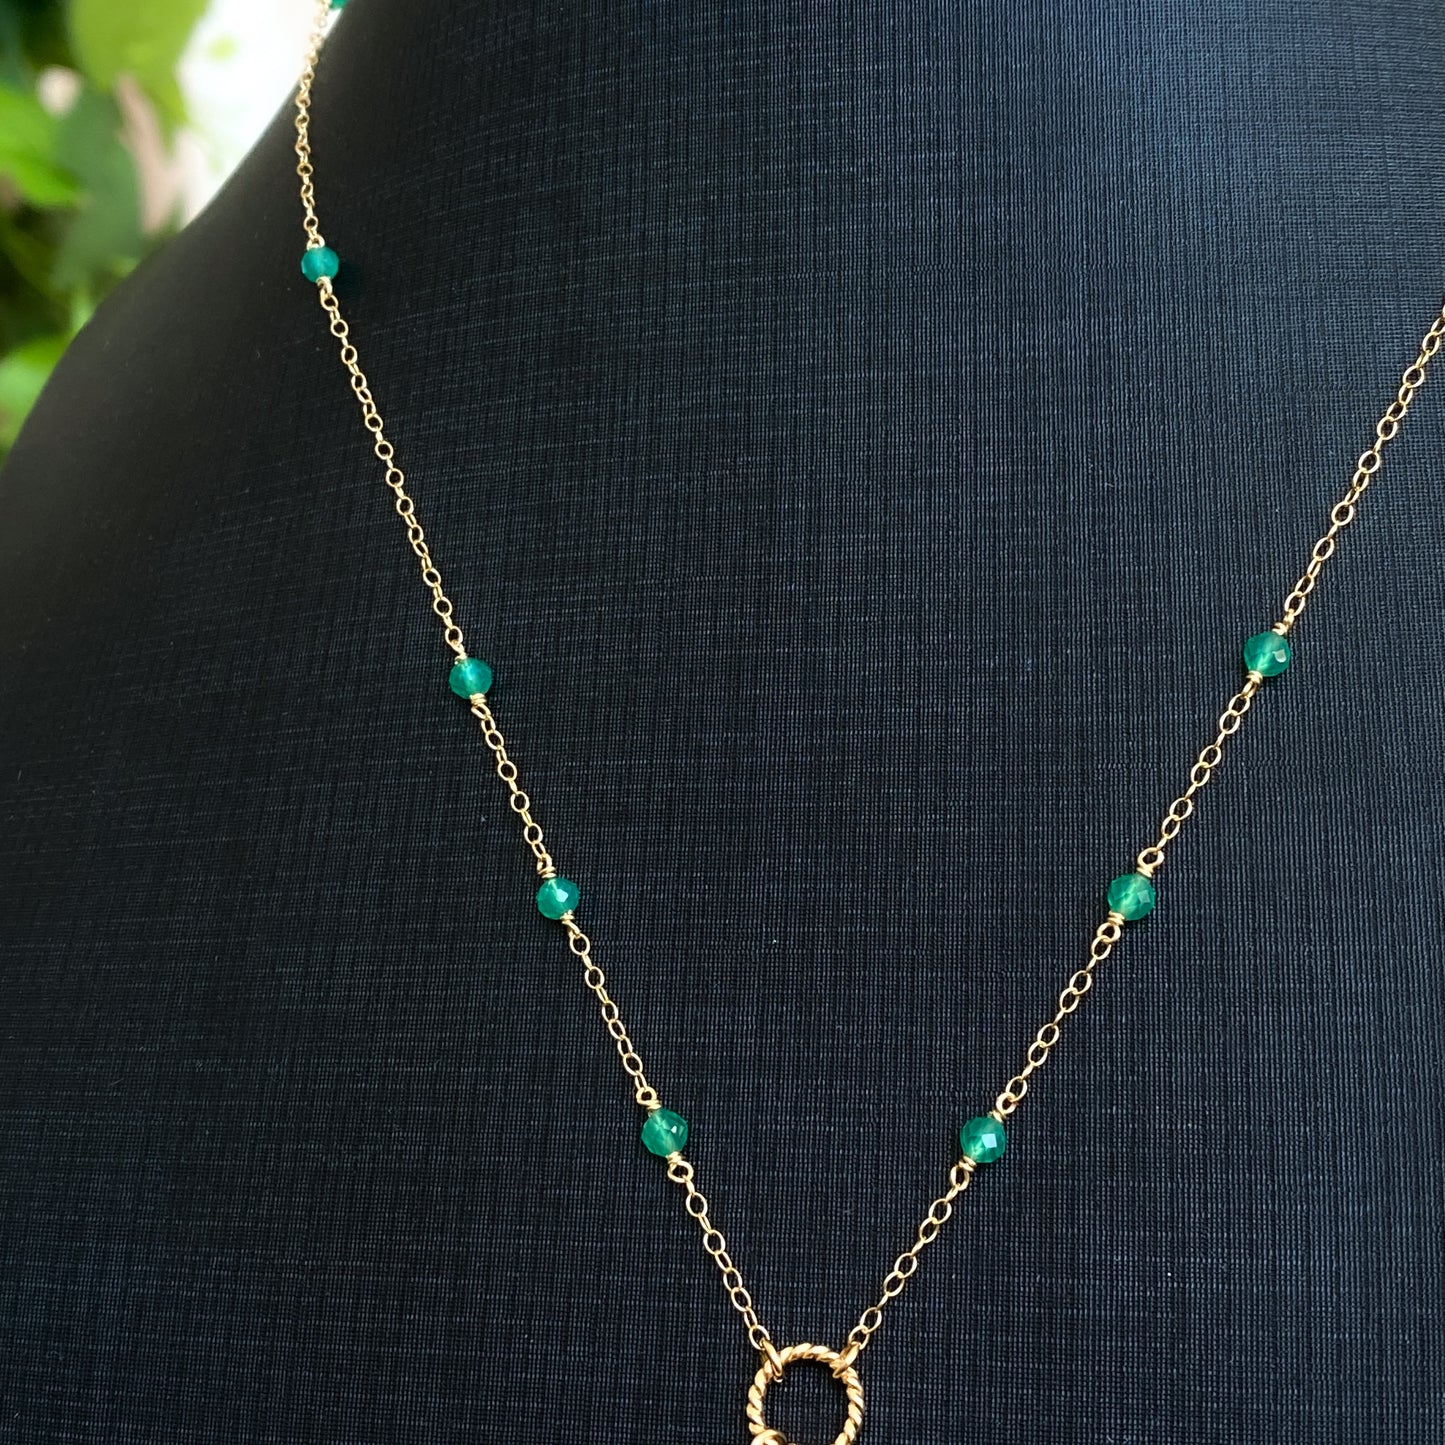 Daphne ~ Green Onyx and 14k Gold Filled Charm Necklace